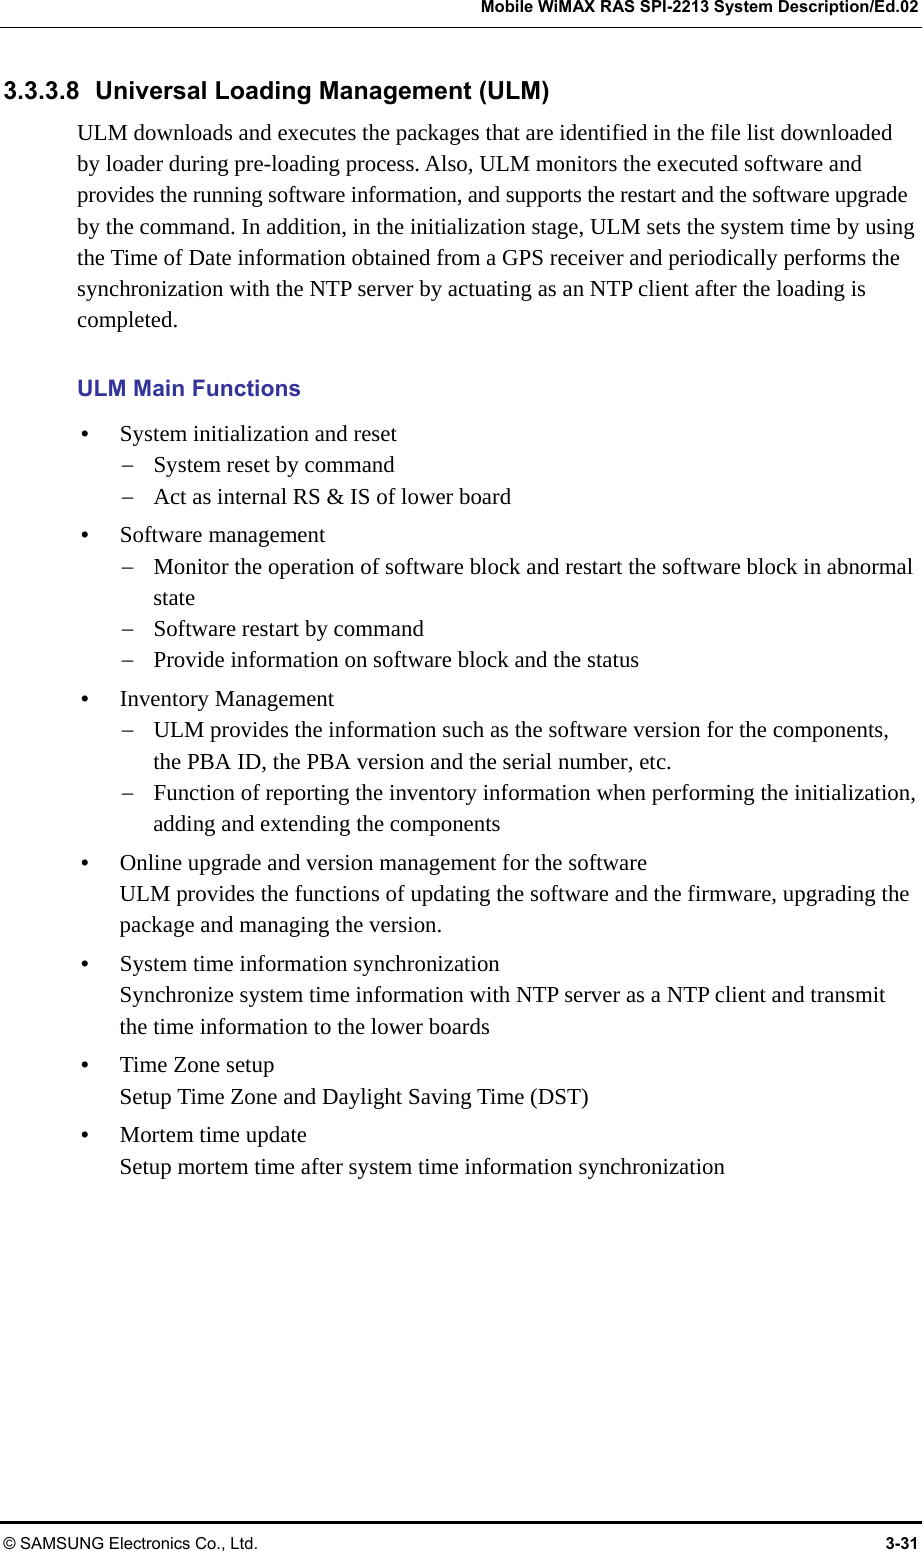   Mobile WiMAX RAS SPI-2213 System Description/Ed.02 © SAMSUNG Electronics Co., Ltd.  3-31 3.3.3.8  Universal Loading Management (ULM) ULM downloads and executes the packages that are identified in the file list downloaded by loader during pre-loading process. Also, ULM monitors the executed software and provides the running software information, and supports the restart and the software upgrade by the command. In addition, in the initialization stage, ULM sets the system time by using the Time of Date information obtained from a GPS receiver and periodically performs the synchronization with the NTP server by actuating as an NTP client after the loading is completed.  ULM Main Functions y System initialization and reset − System reset by command − Act as internal RS &amp; IS of lower board y Software management − Monitor the operation of software block and restart the software block in abnormal state − Software restart by command − Provide information on software block and the status y Inventory Management − ULM provides the information such as the software version for the components, the PBA ID, the PBA version and the serial number, etc. − Function of reporting the inventory information when performing the initialization, adding and extending the components y Online upgrade and version management for the software ULM provides the functions of updating the software and the firmware, upgrading the package and managing the version. y System time information synchronization Synchronize system time information with NTP server as a NTP client and transmit the time information to the lower boards y Time Zone setup Setup Time Zone and Daylight Saving Time (DST) y Mortem time update Setup mortem time after system time information synchronization  